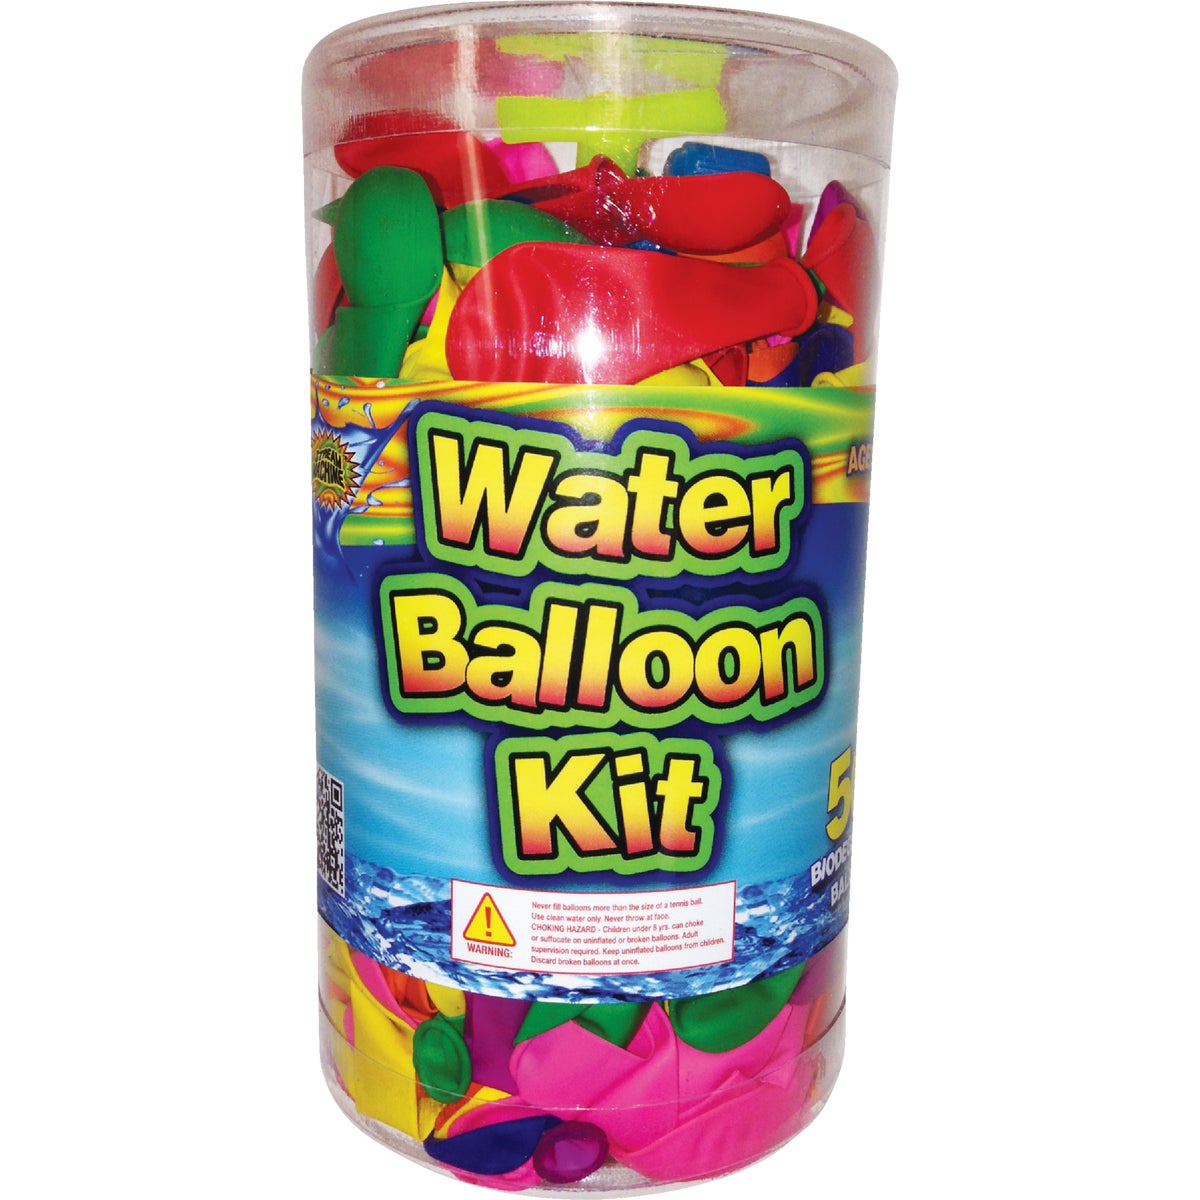 Outdoor Water Toys